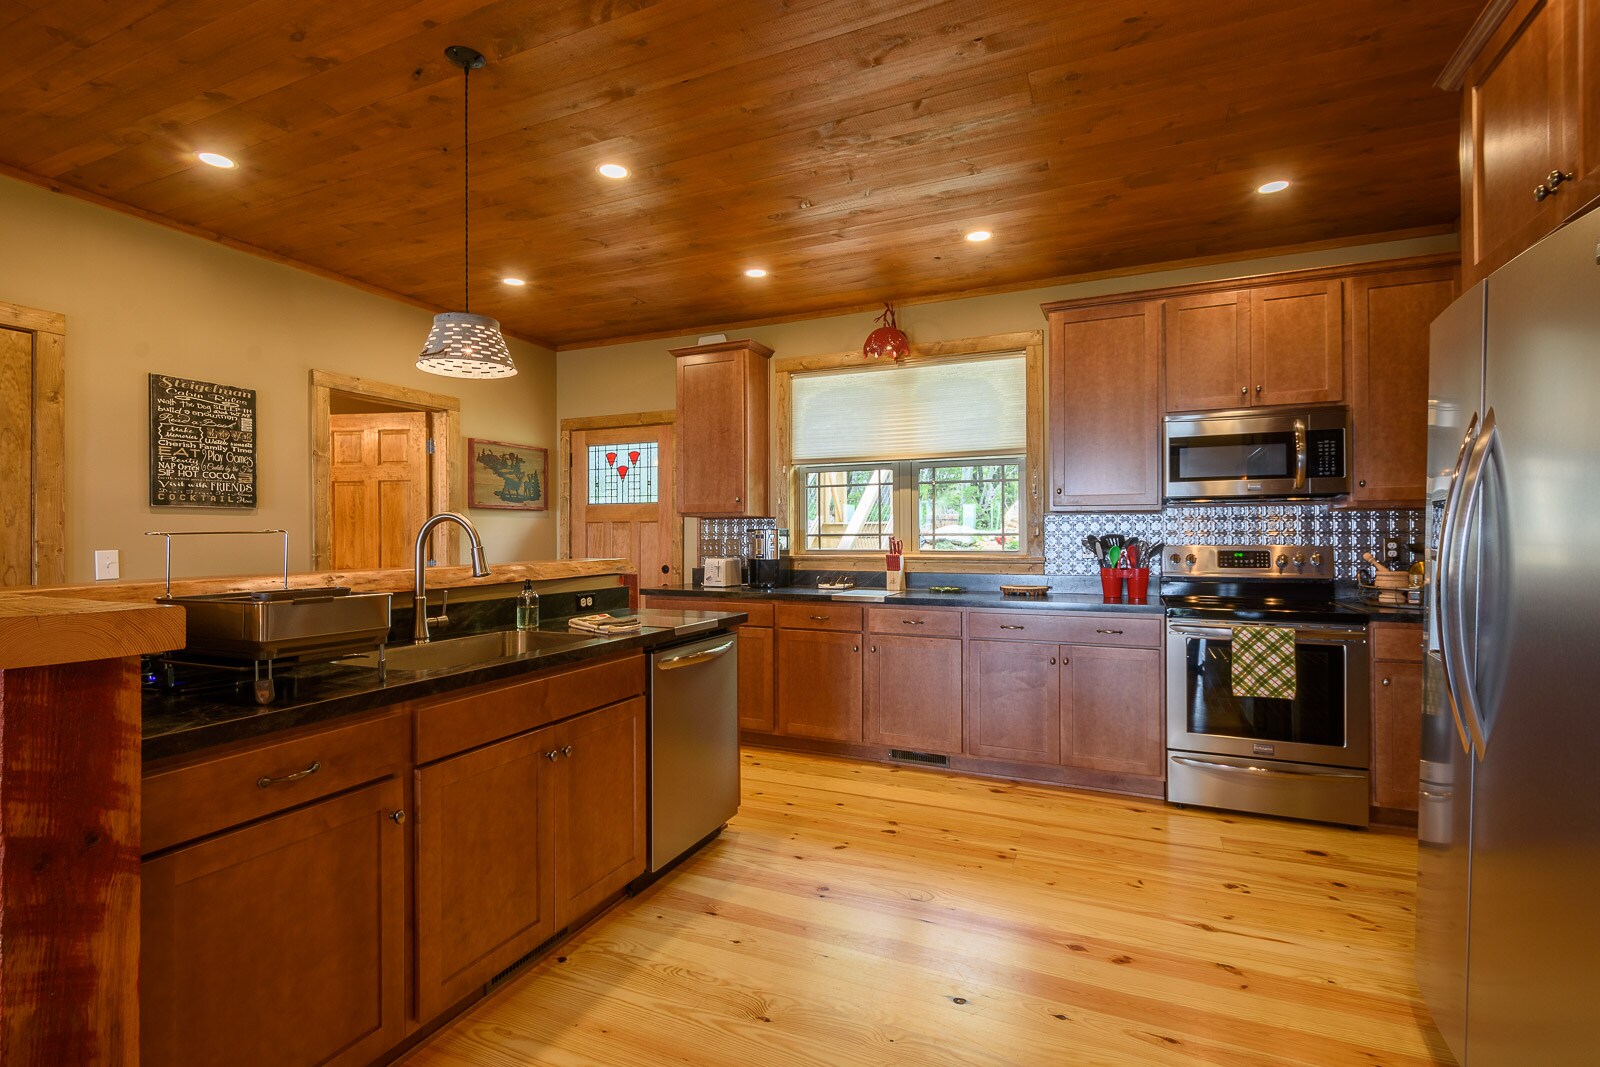 Large kitchen featuring a bar and stainless steel appliances